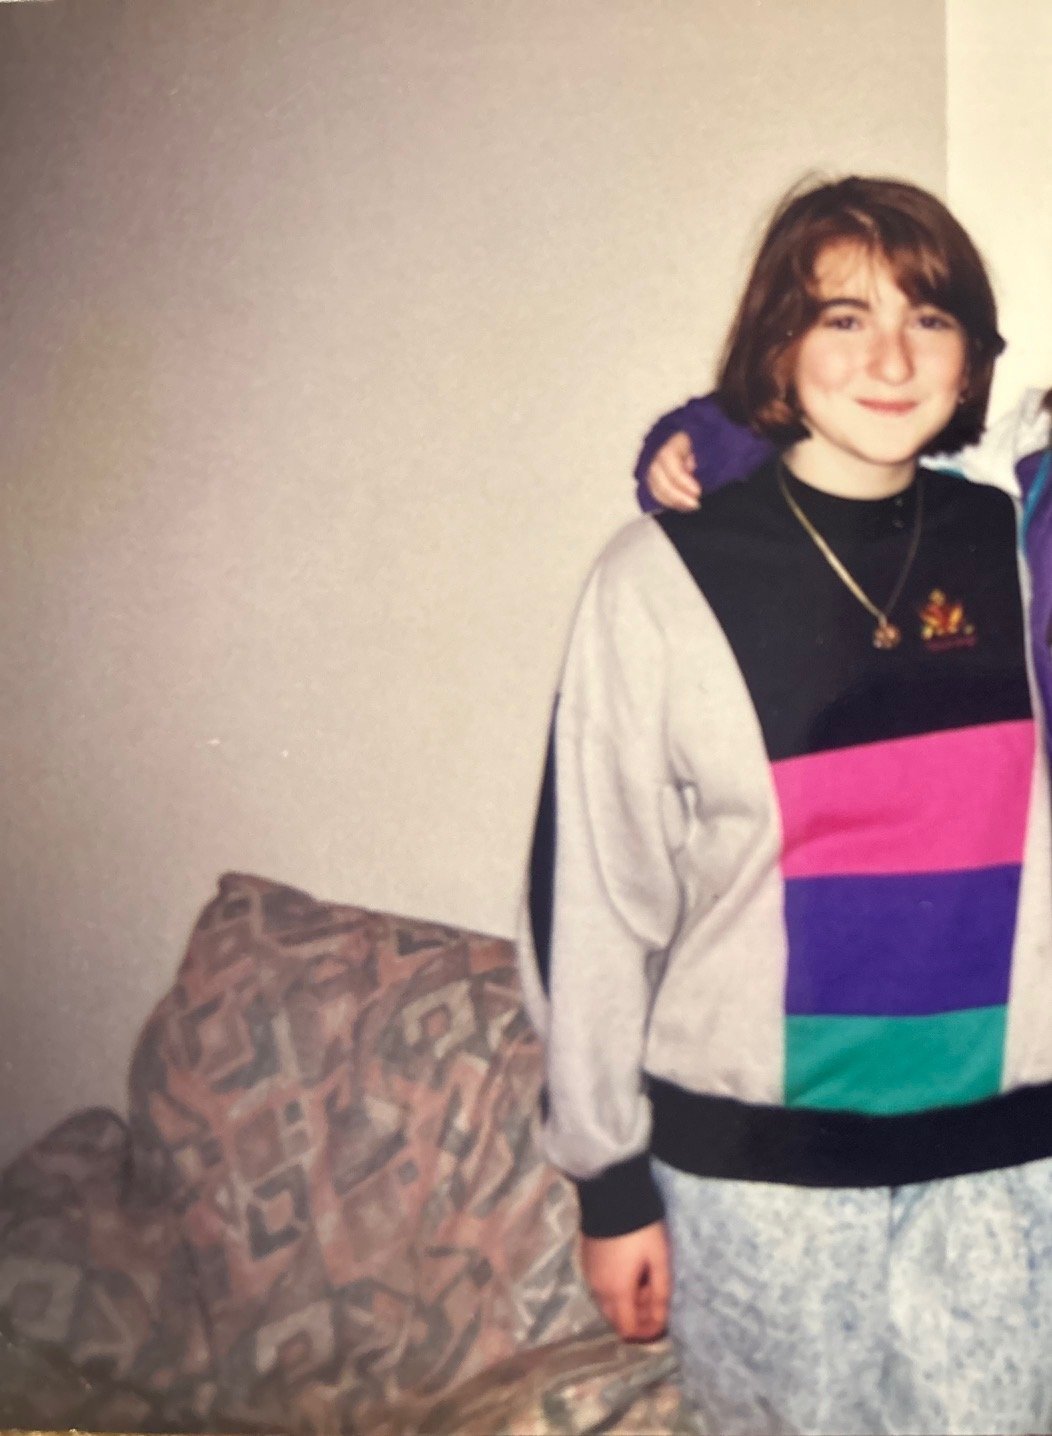    Acid wash jeans, Belarusian sweatshirt, my first Star of David, the pink armchair sold to us as part of a used furniture set, and perpetually red-rimmed eyes. Winter of 1994/1995.   